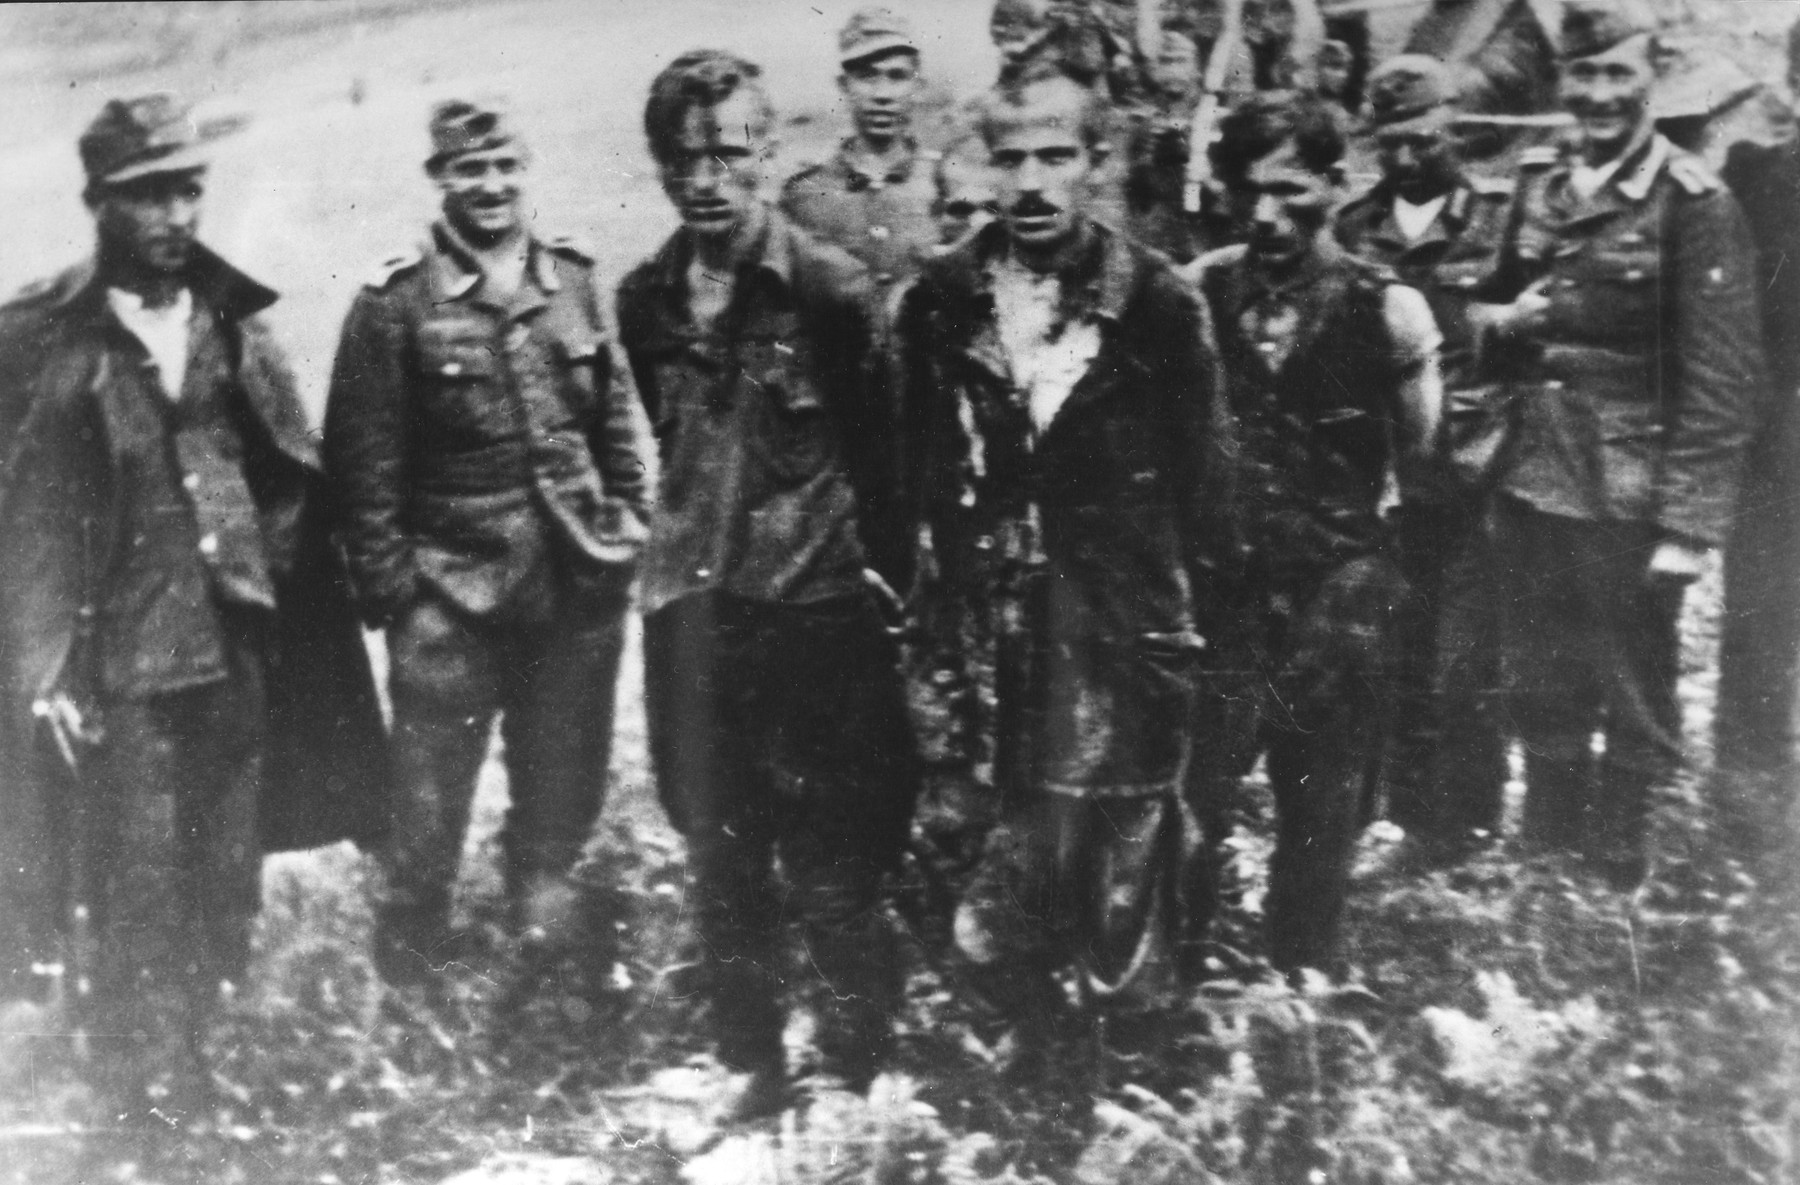 Captured Slovenian partisans are led by soldiers to their execution.